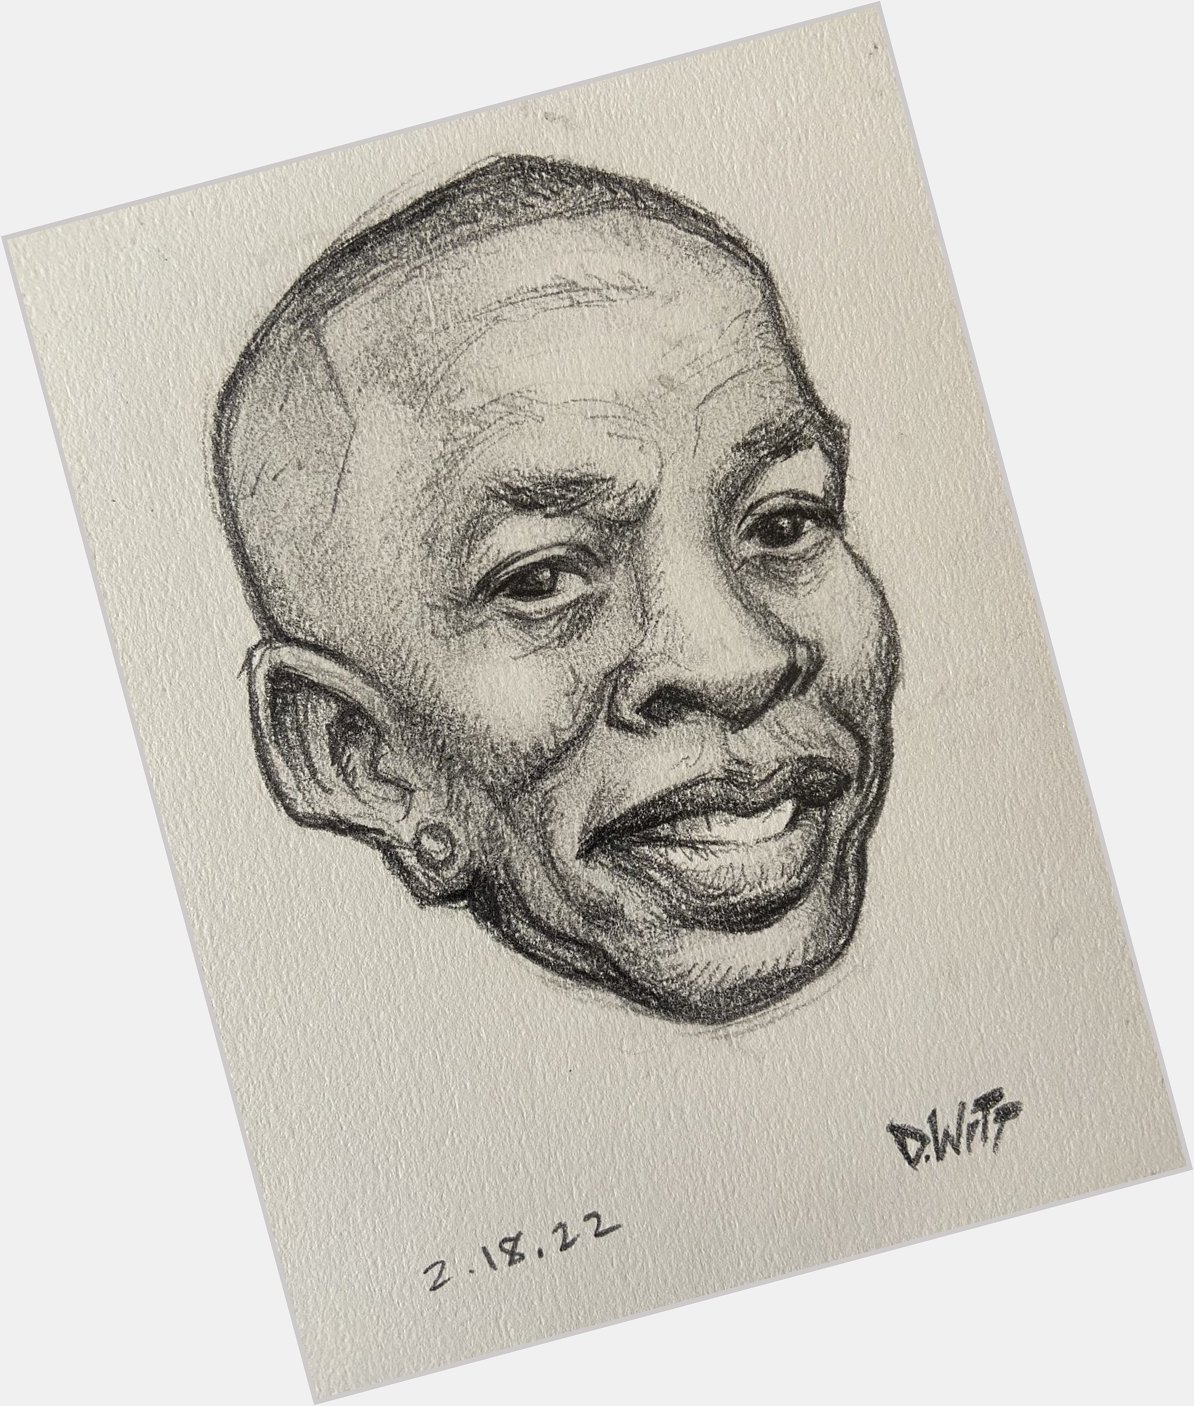 It s Dre Day! Happy birthday Dr.Dre! Todays caricature practice 